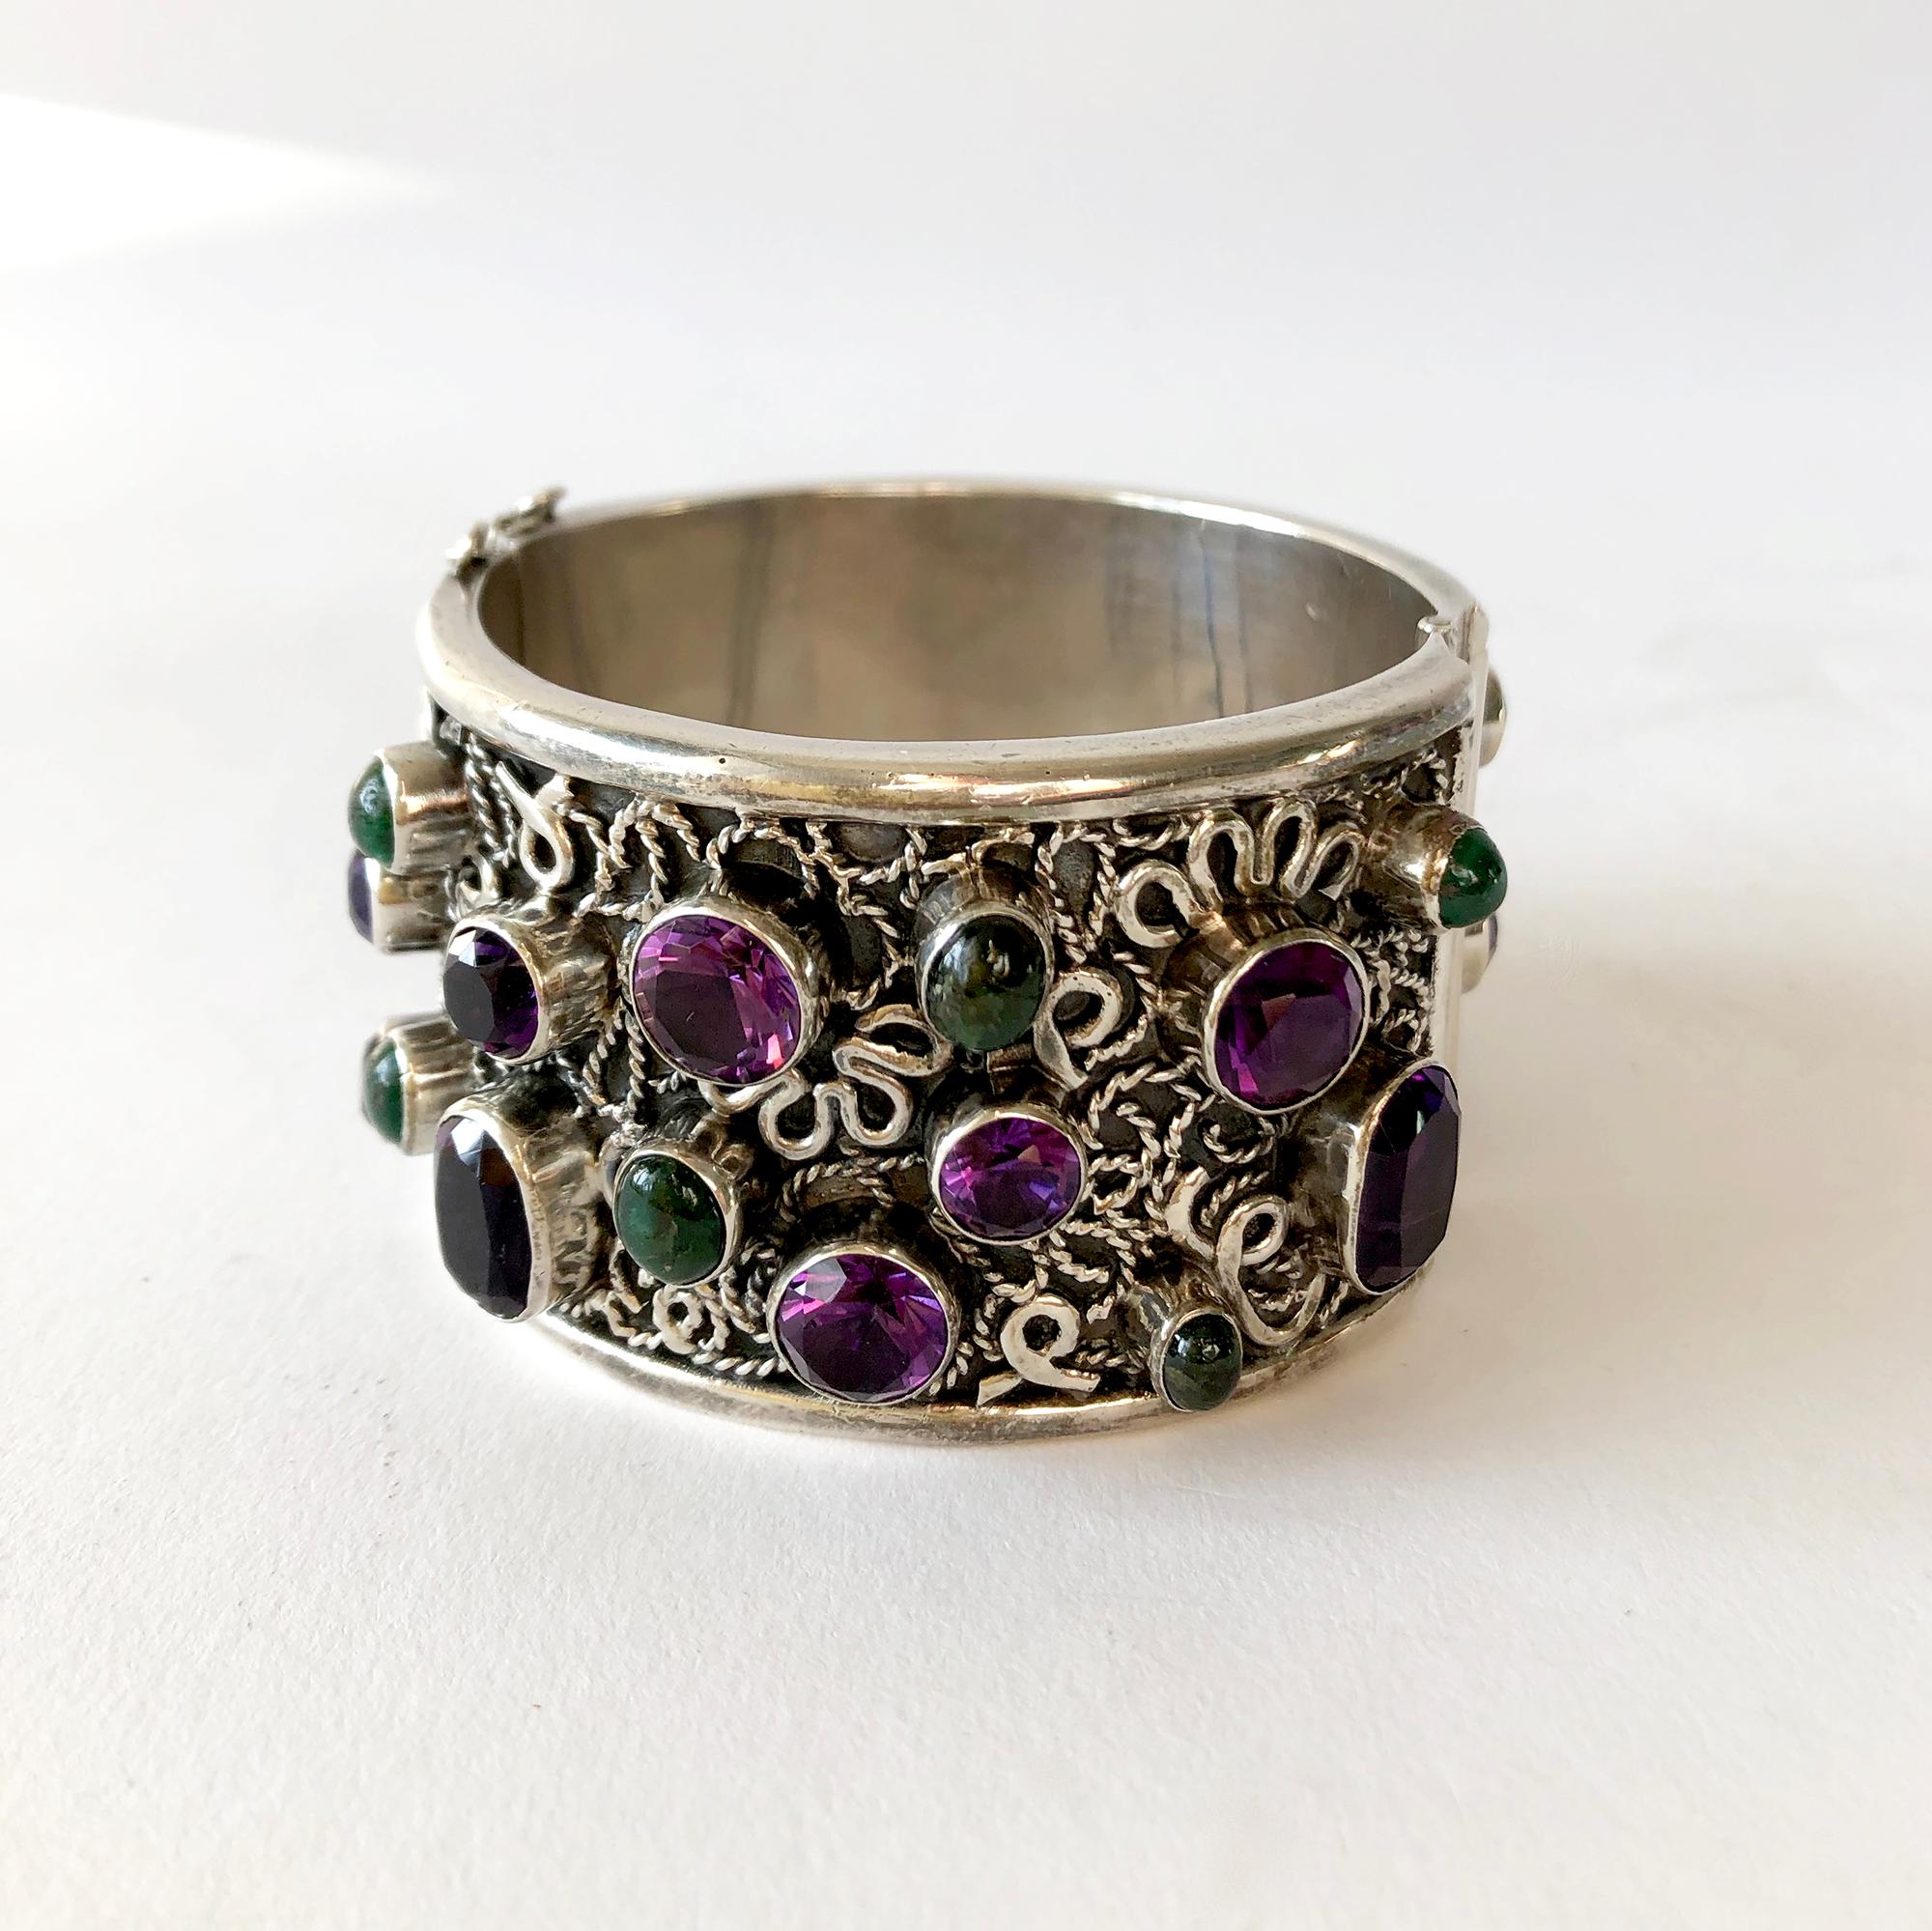 Wide, hinged bangle cuff bracelet encrusted with faceted amethyst and green gemstones created by Carmen Beckman of Mexico.  Bracelet measures 1.625